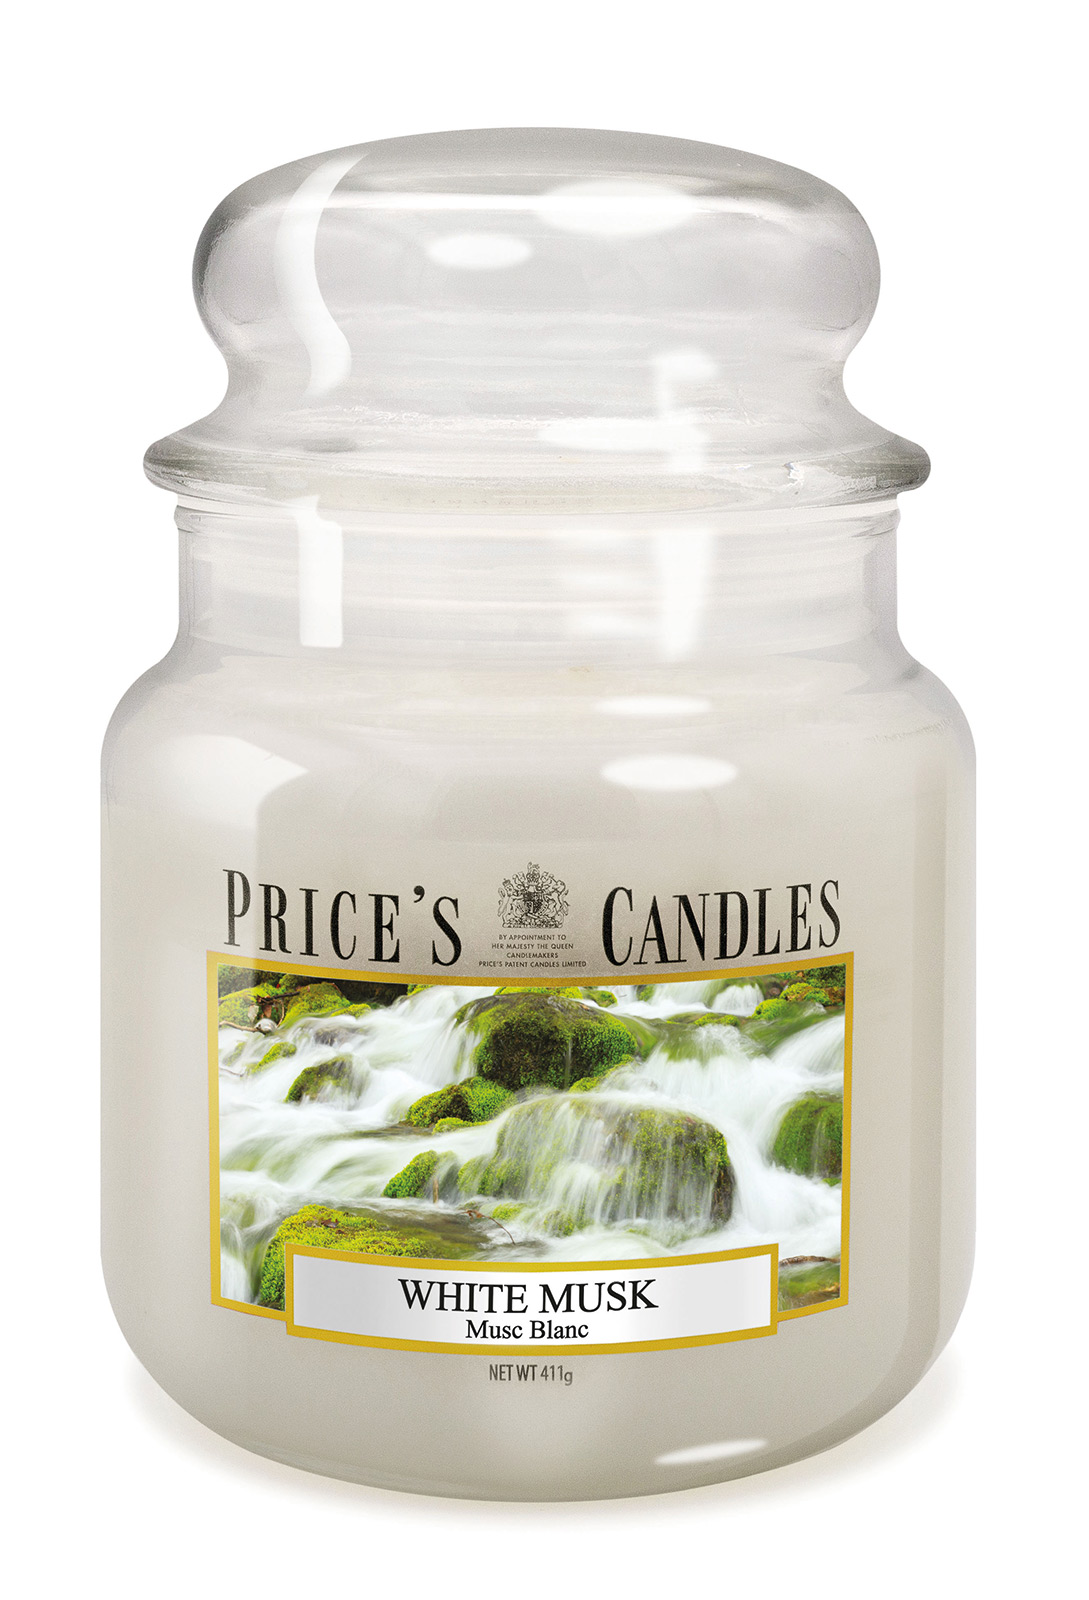 Prices Candle "White Musk" 411g 